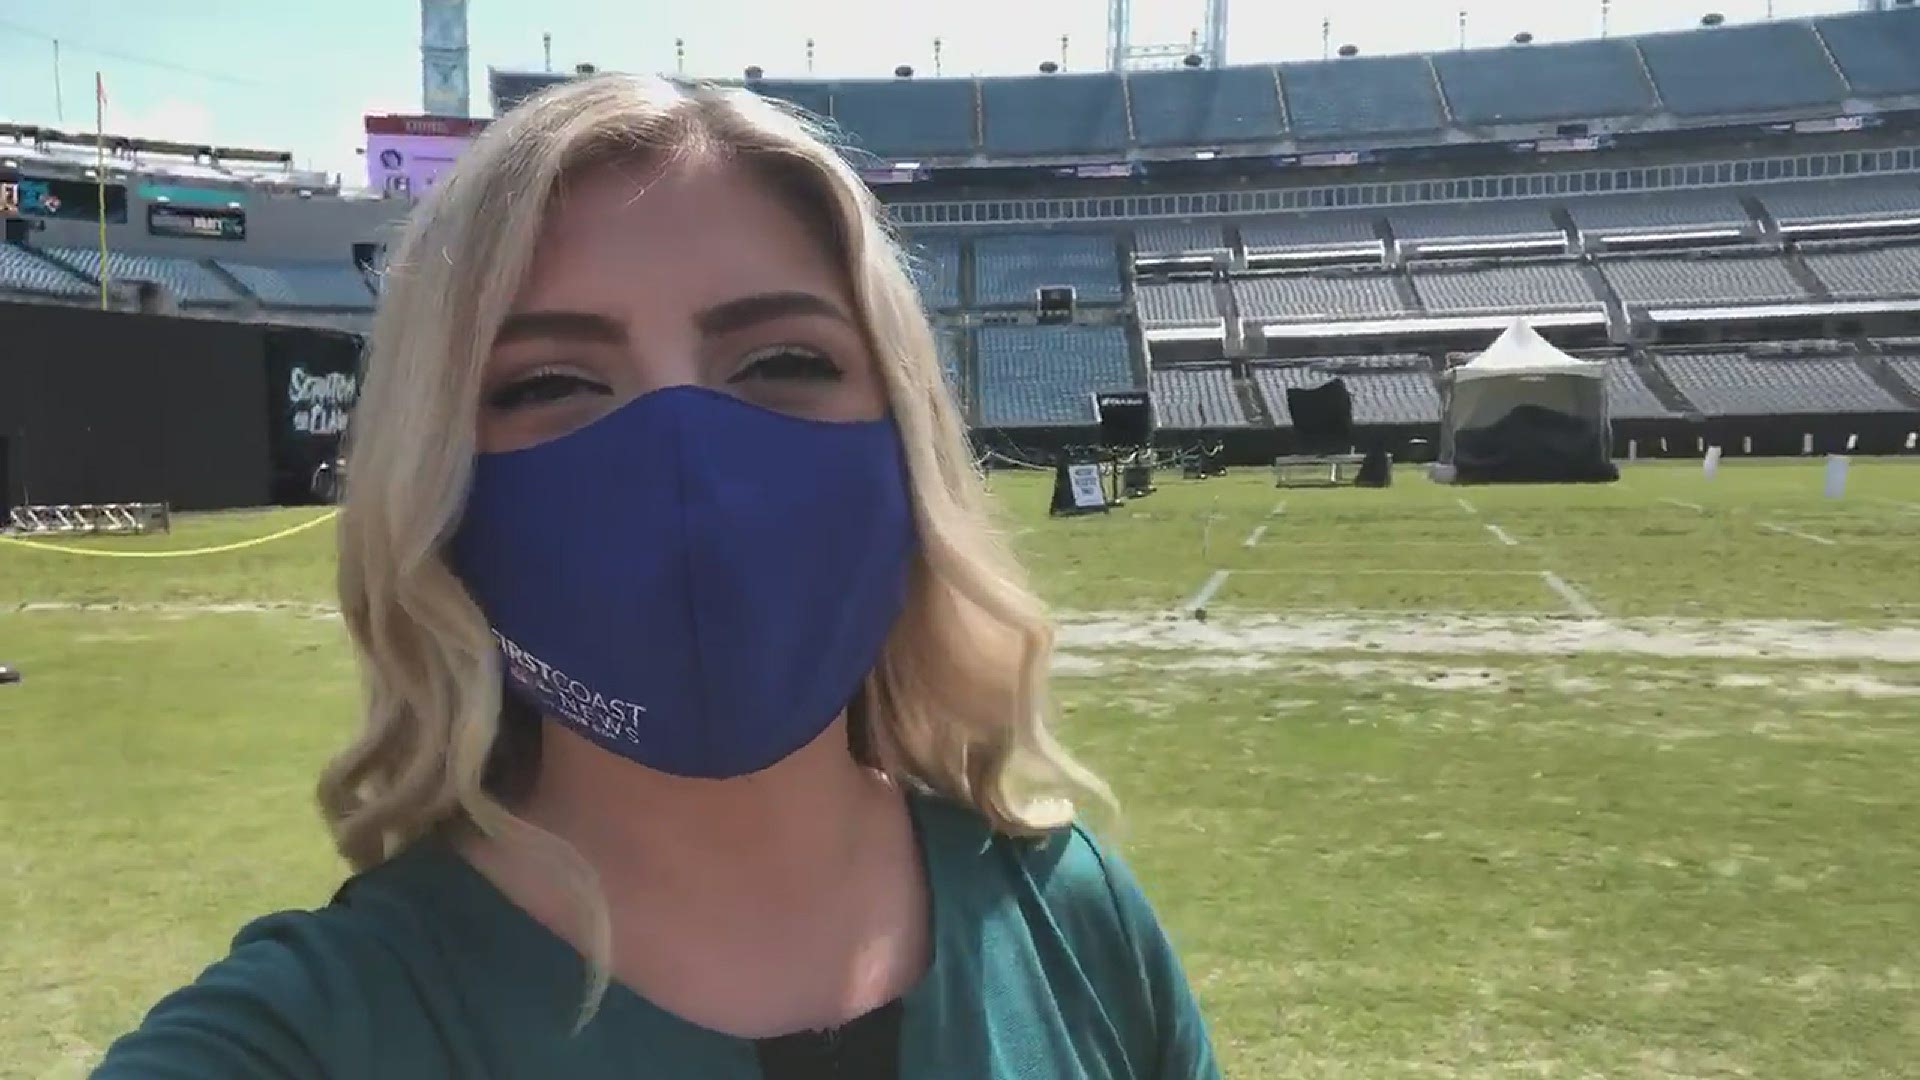 The countdown is on to bring T. Law to Duval! The Jaguars have the No. 1 pick in the NFL Draft at 8 p.m. on ABC25, and TIAA Bank Field is hosting a watch party.
Credit: Leah Shields